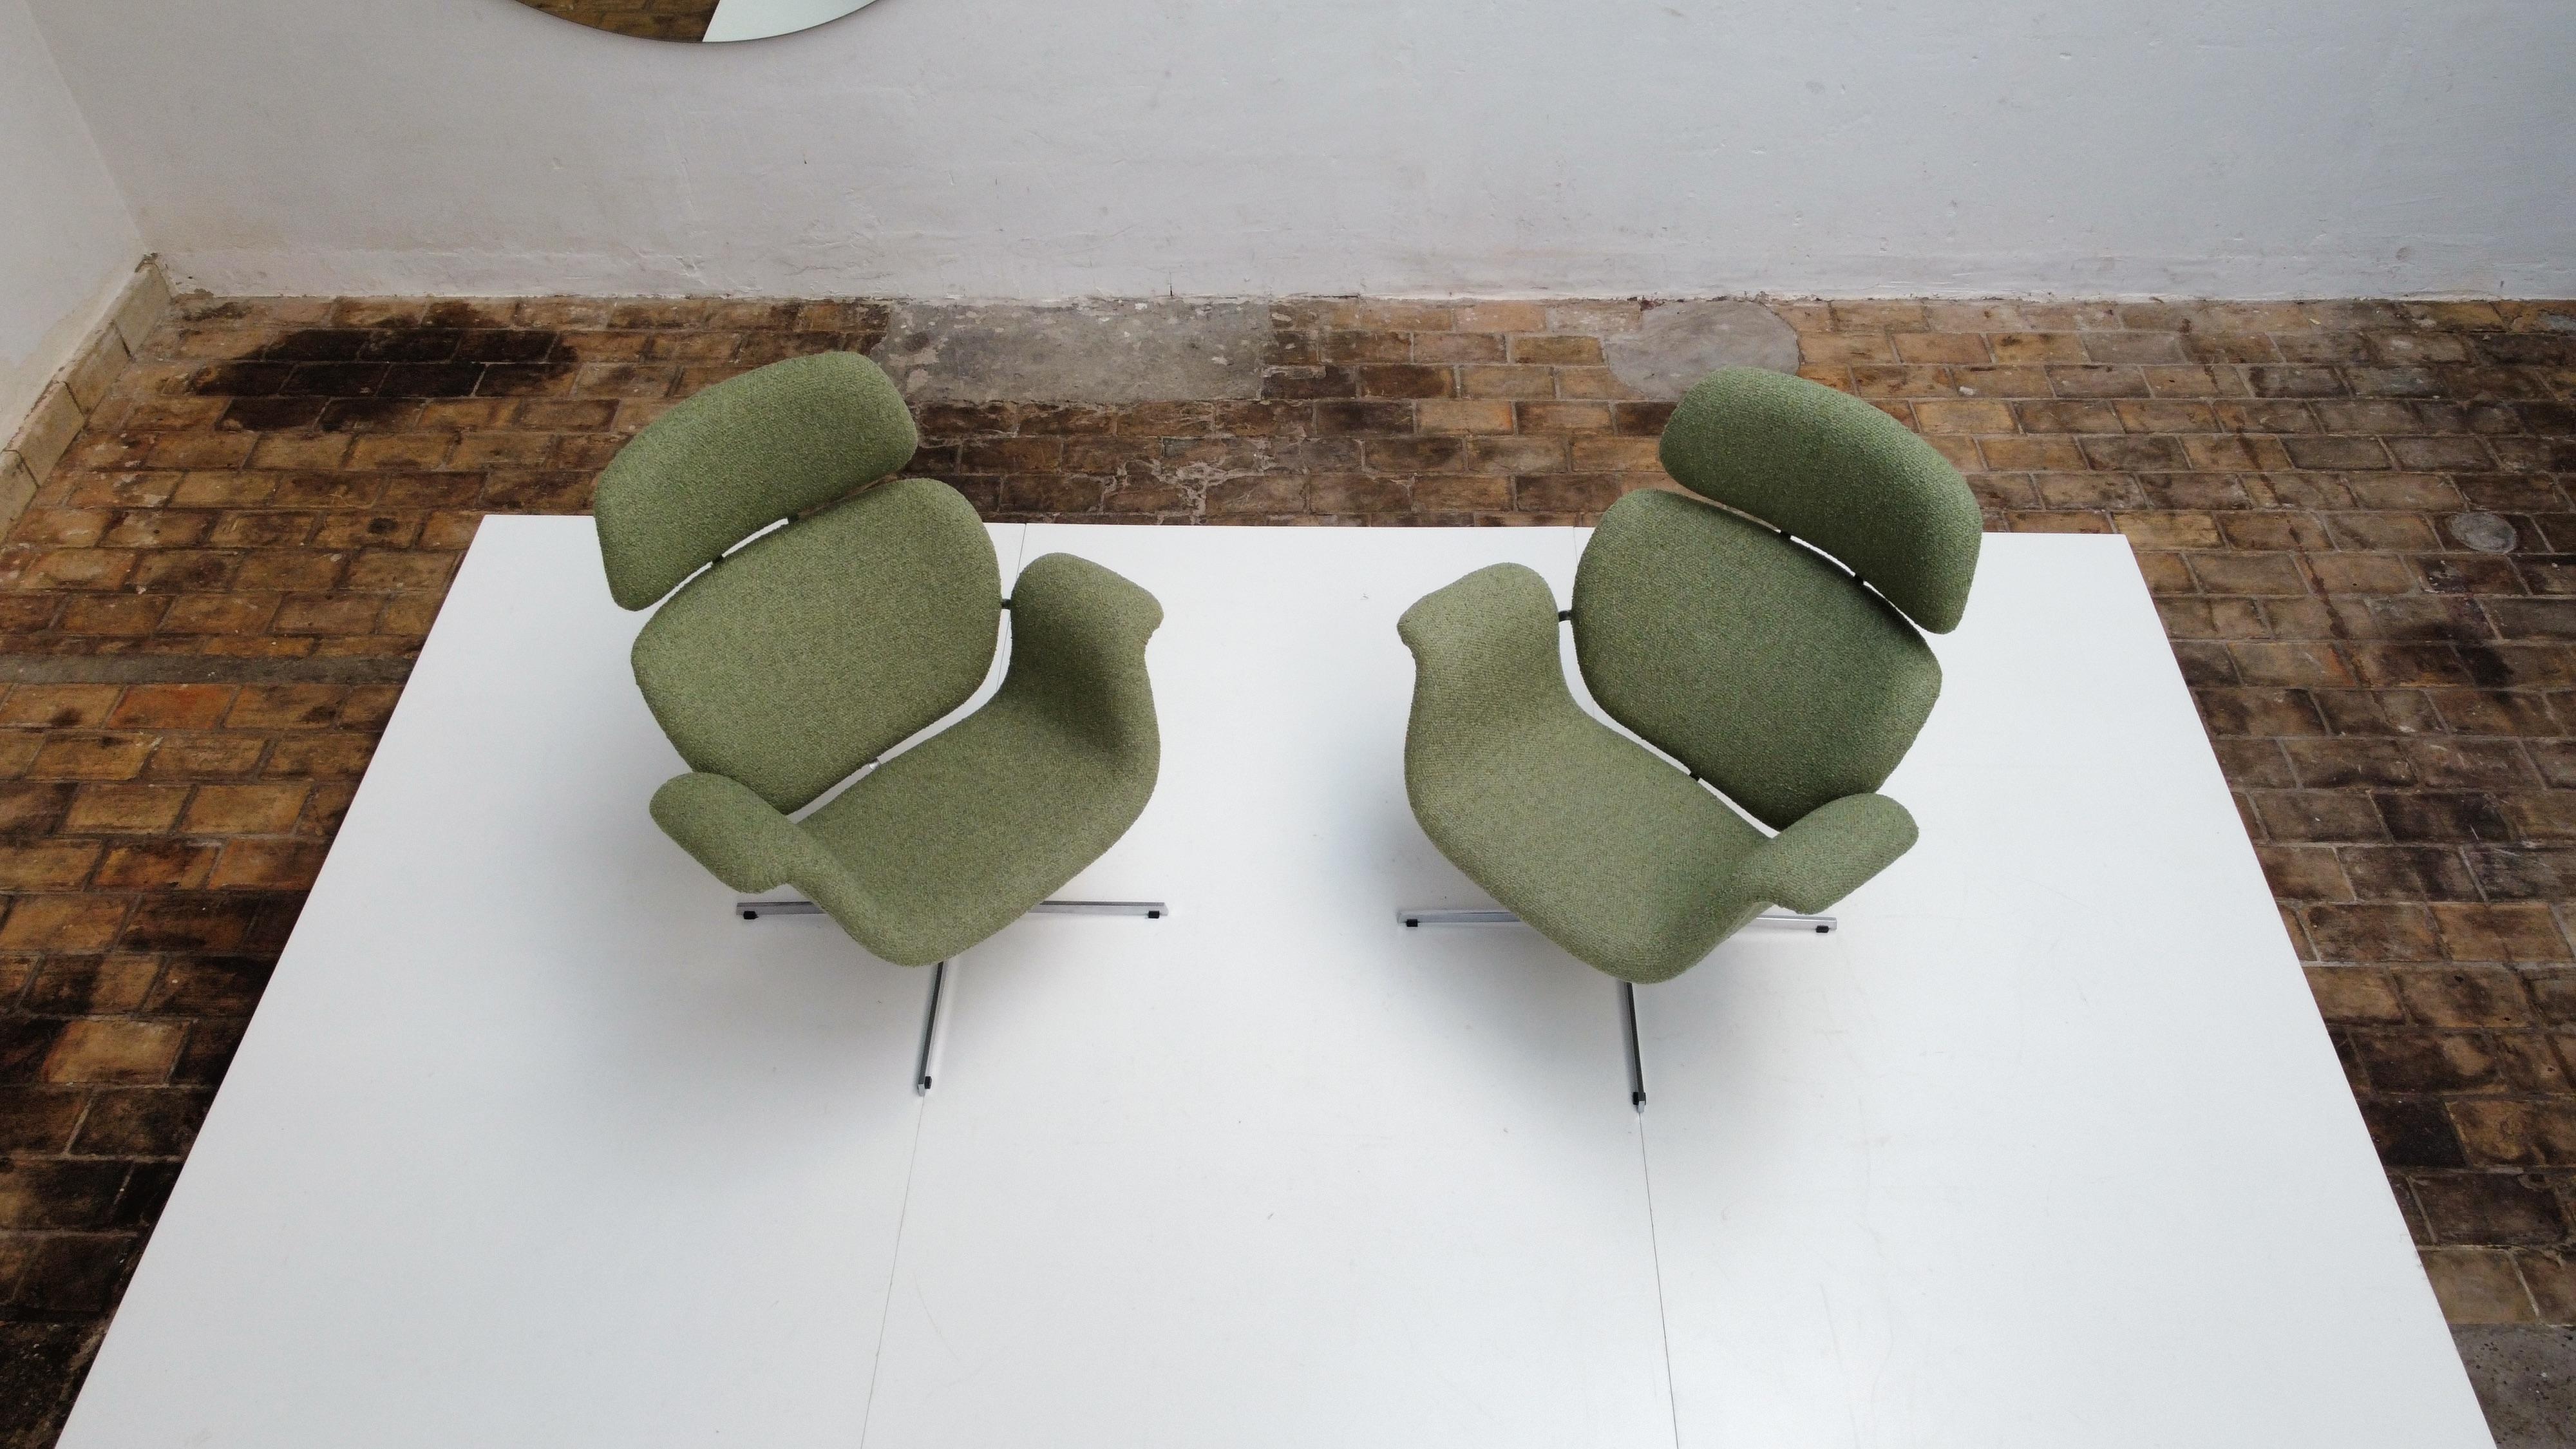 Mid-20th Century Pair of Pierre Paulin F551 Big Tulip Lounge Chairs Artifort 1960s New Upholstery